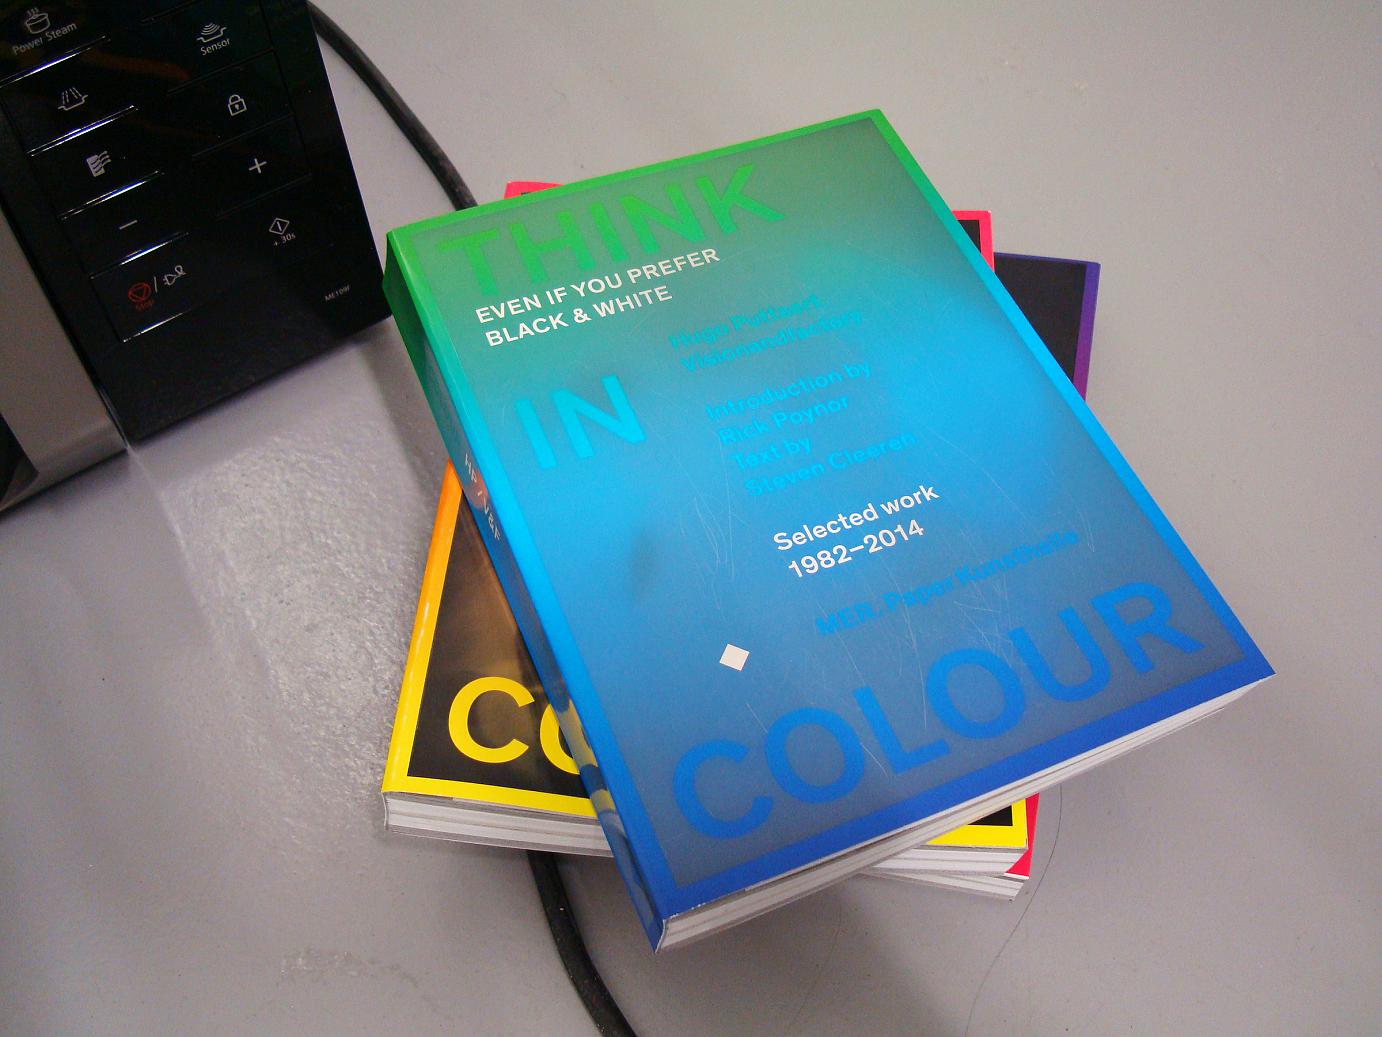 Think in Colour - book cover